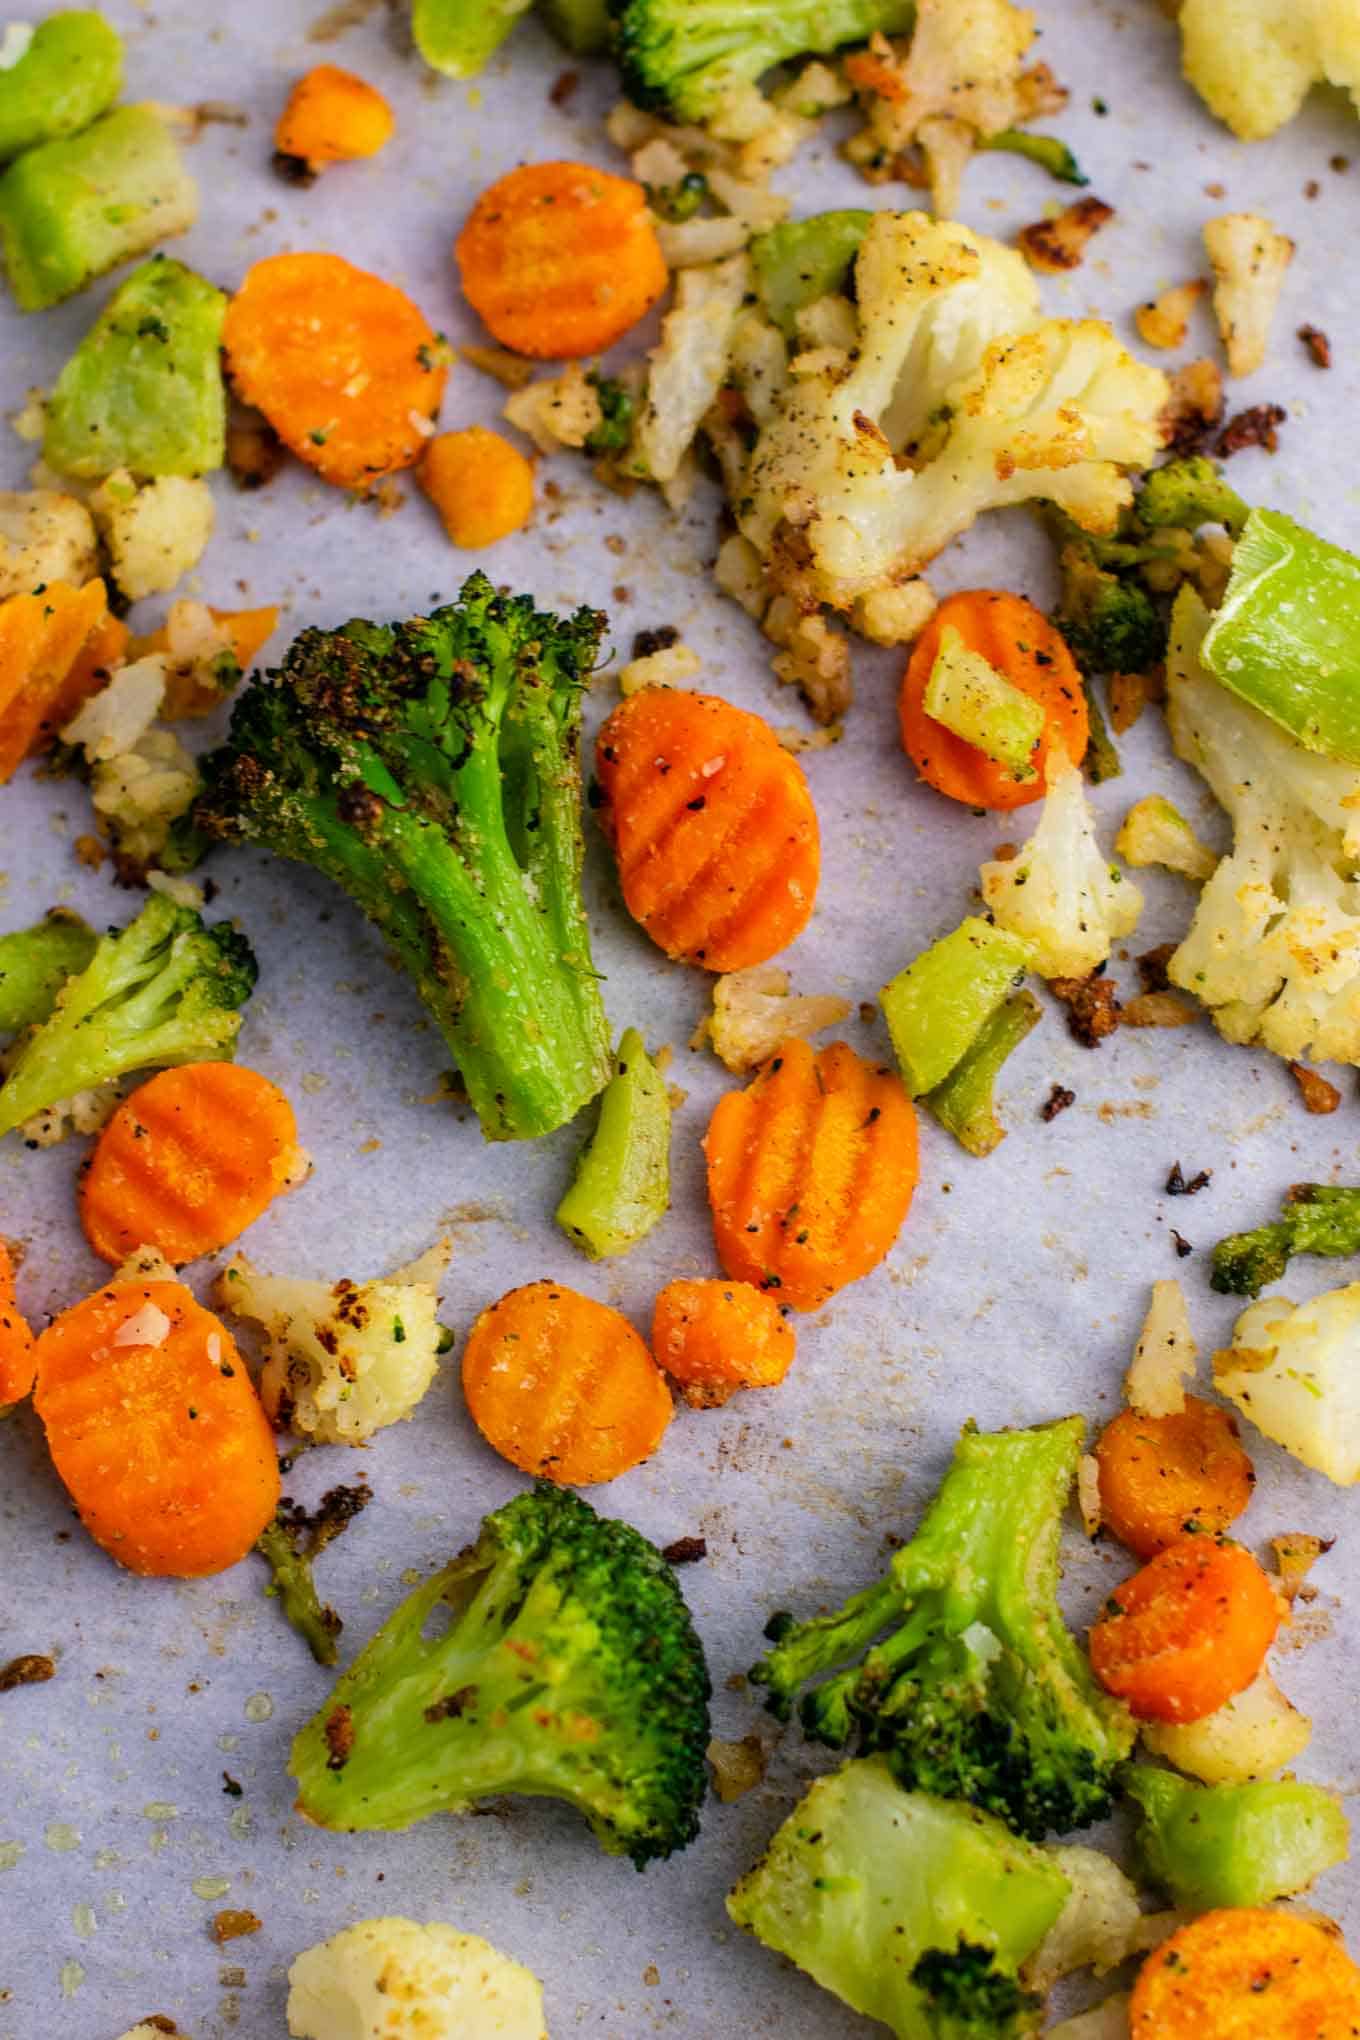 Roasted carrots, cauliflower, and broccoli on a baking sheet